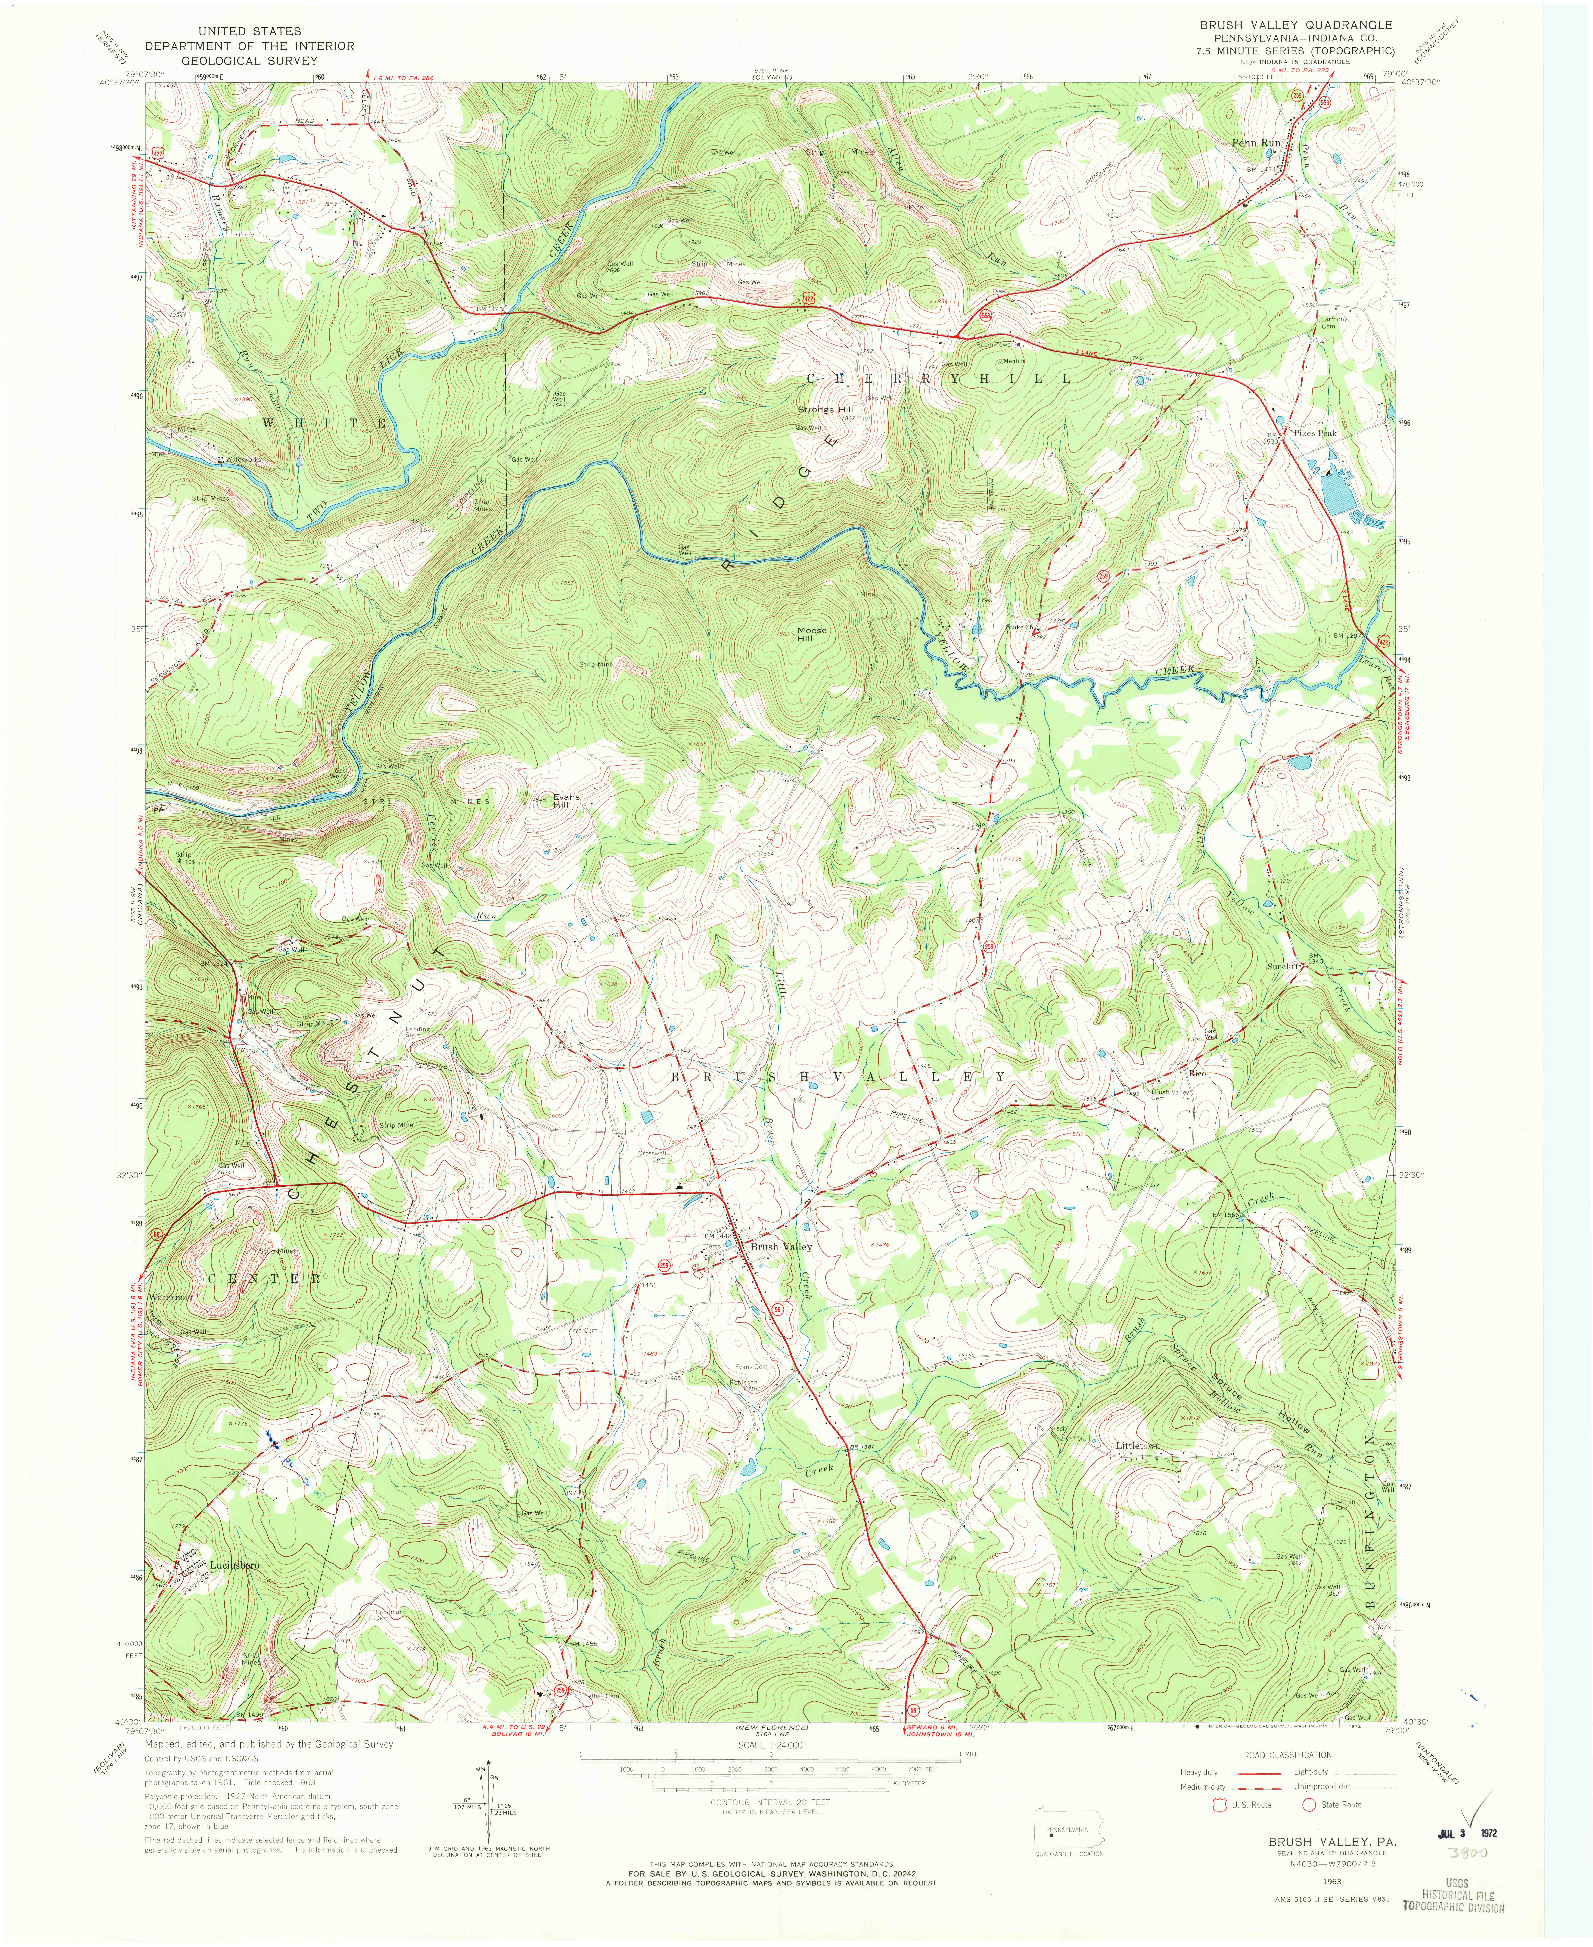 USGS 1:24000-SCALE QUADRANGLE FOR BRUSH VALLEY, PA 1963